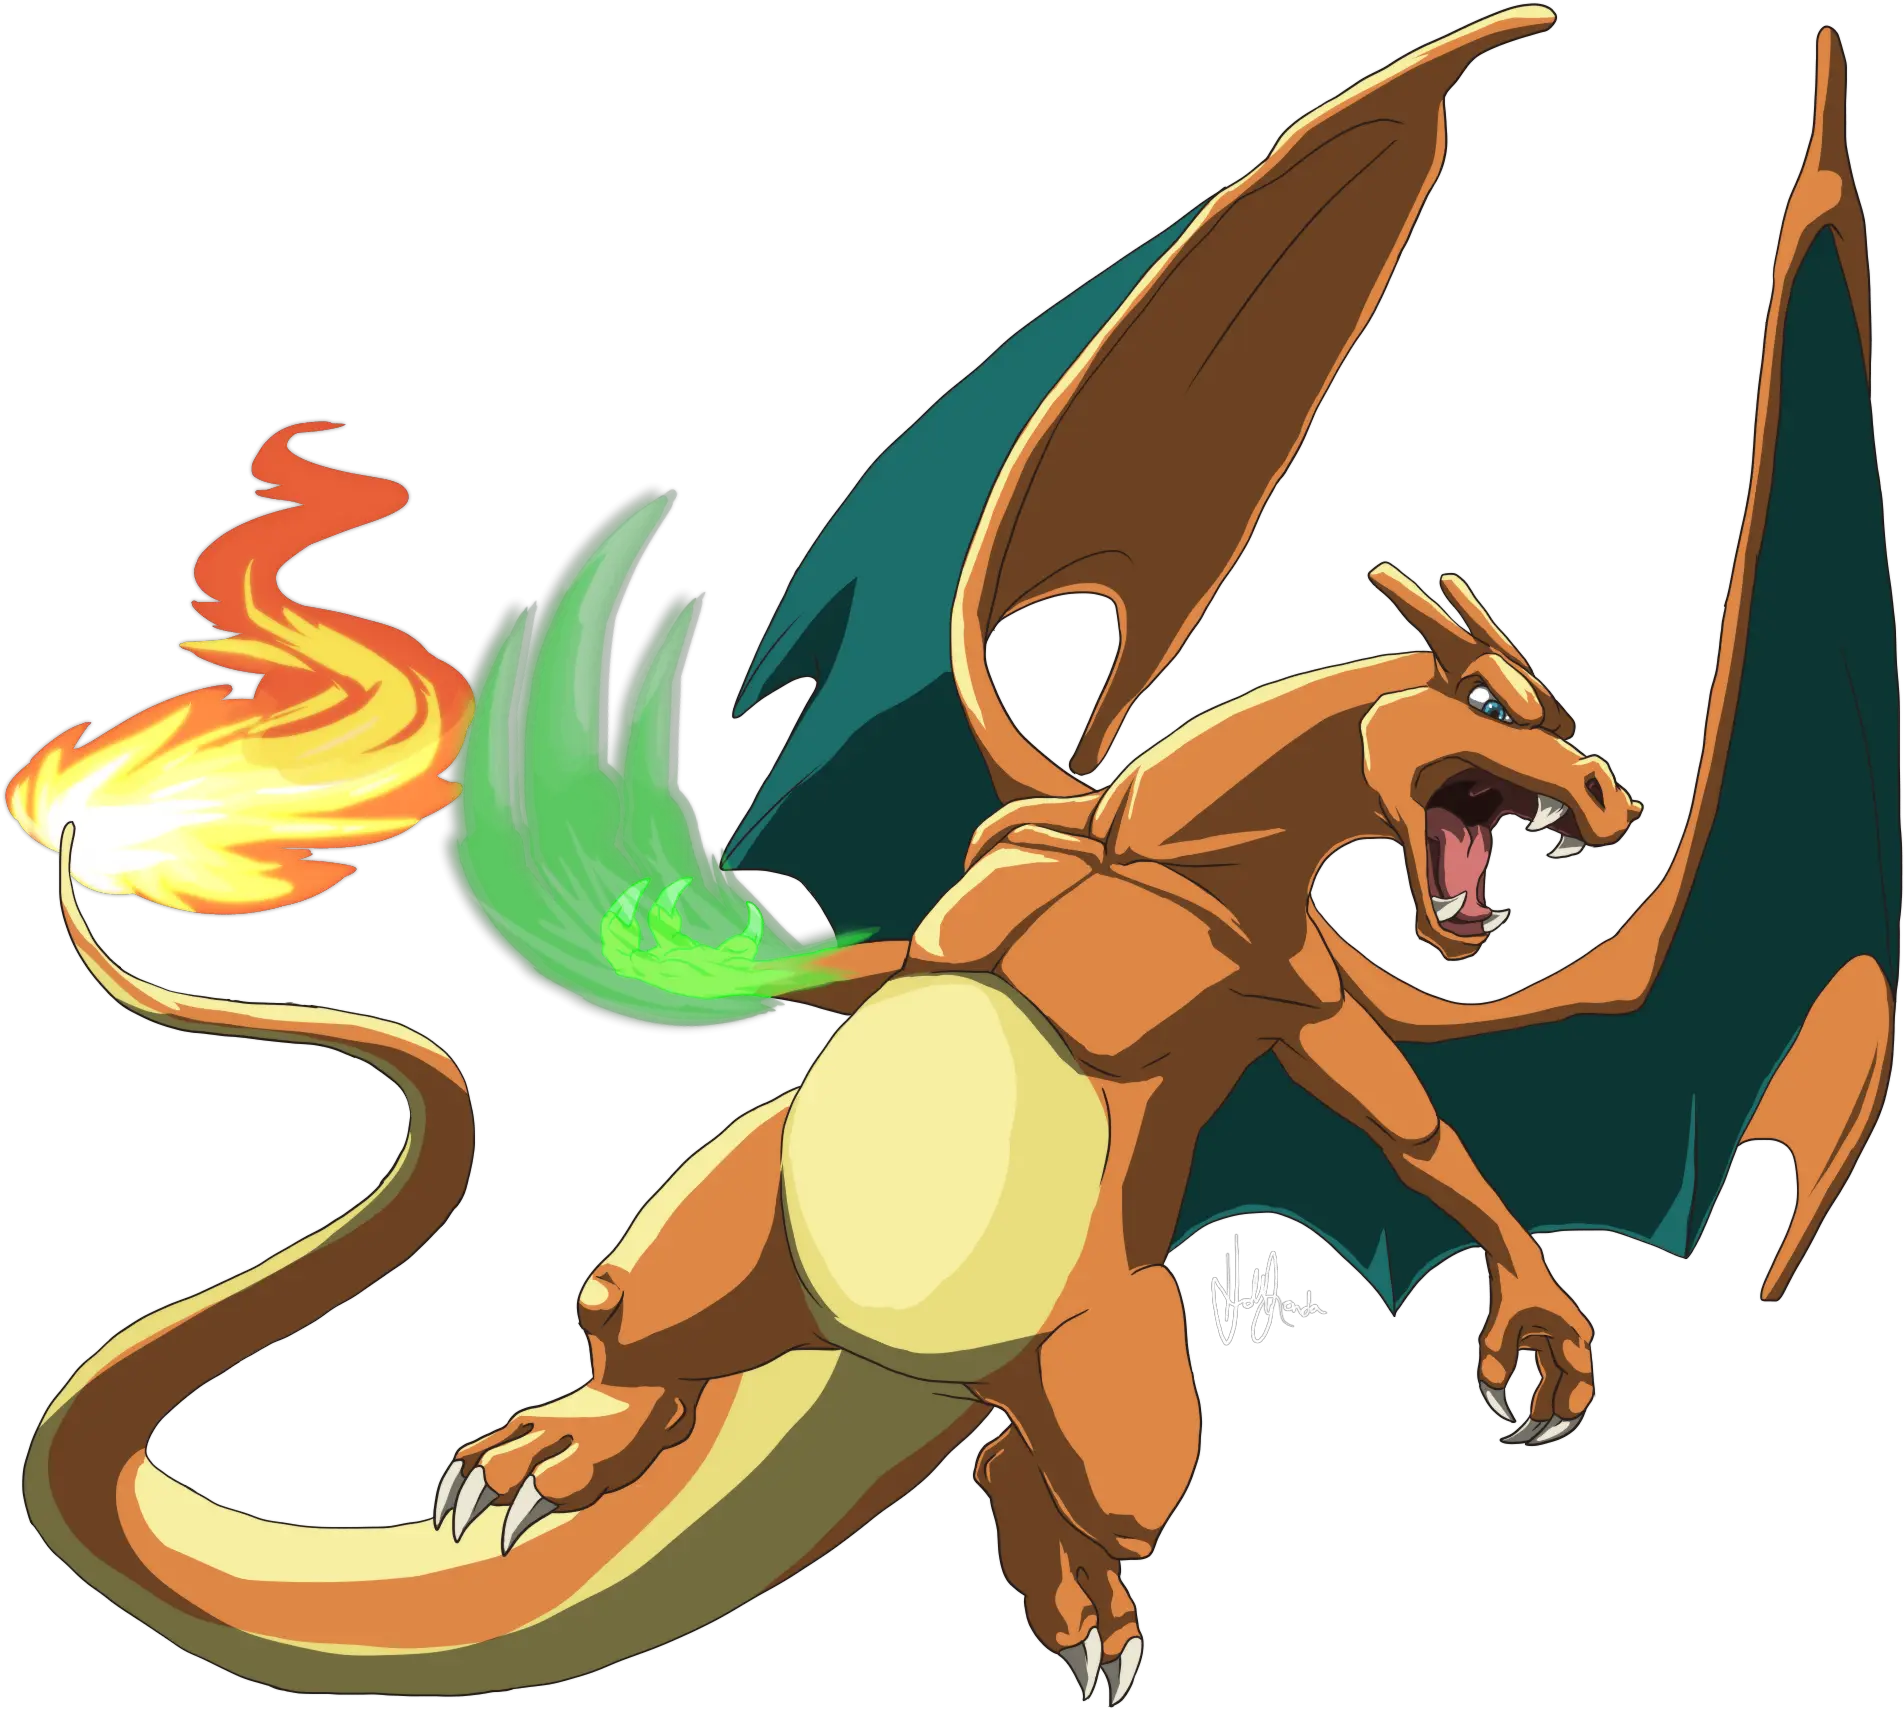 006 Charizard Used Dragon Claw And Flamethrower Pokemon Dragon Png Charizard Png